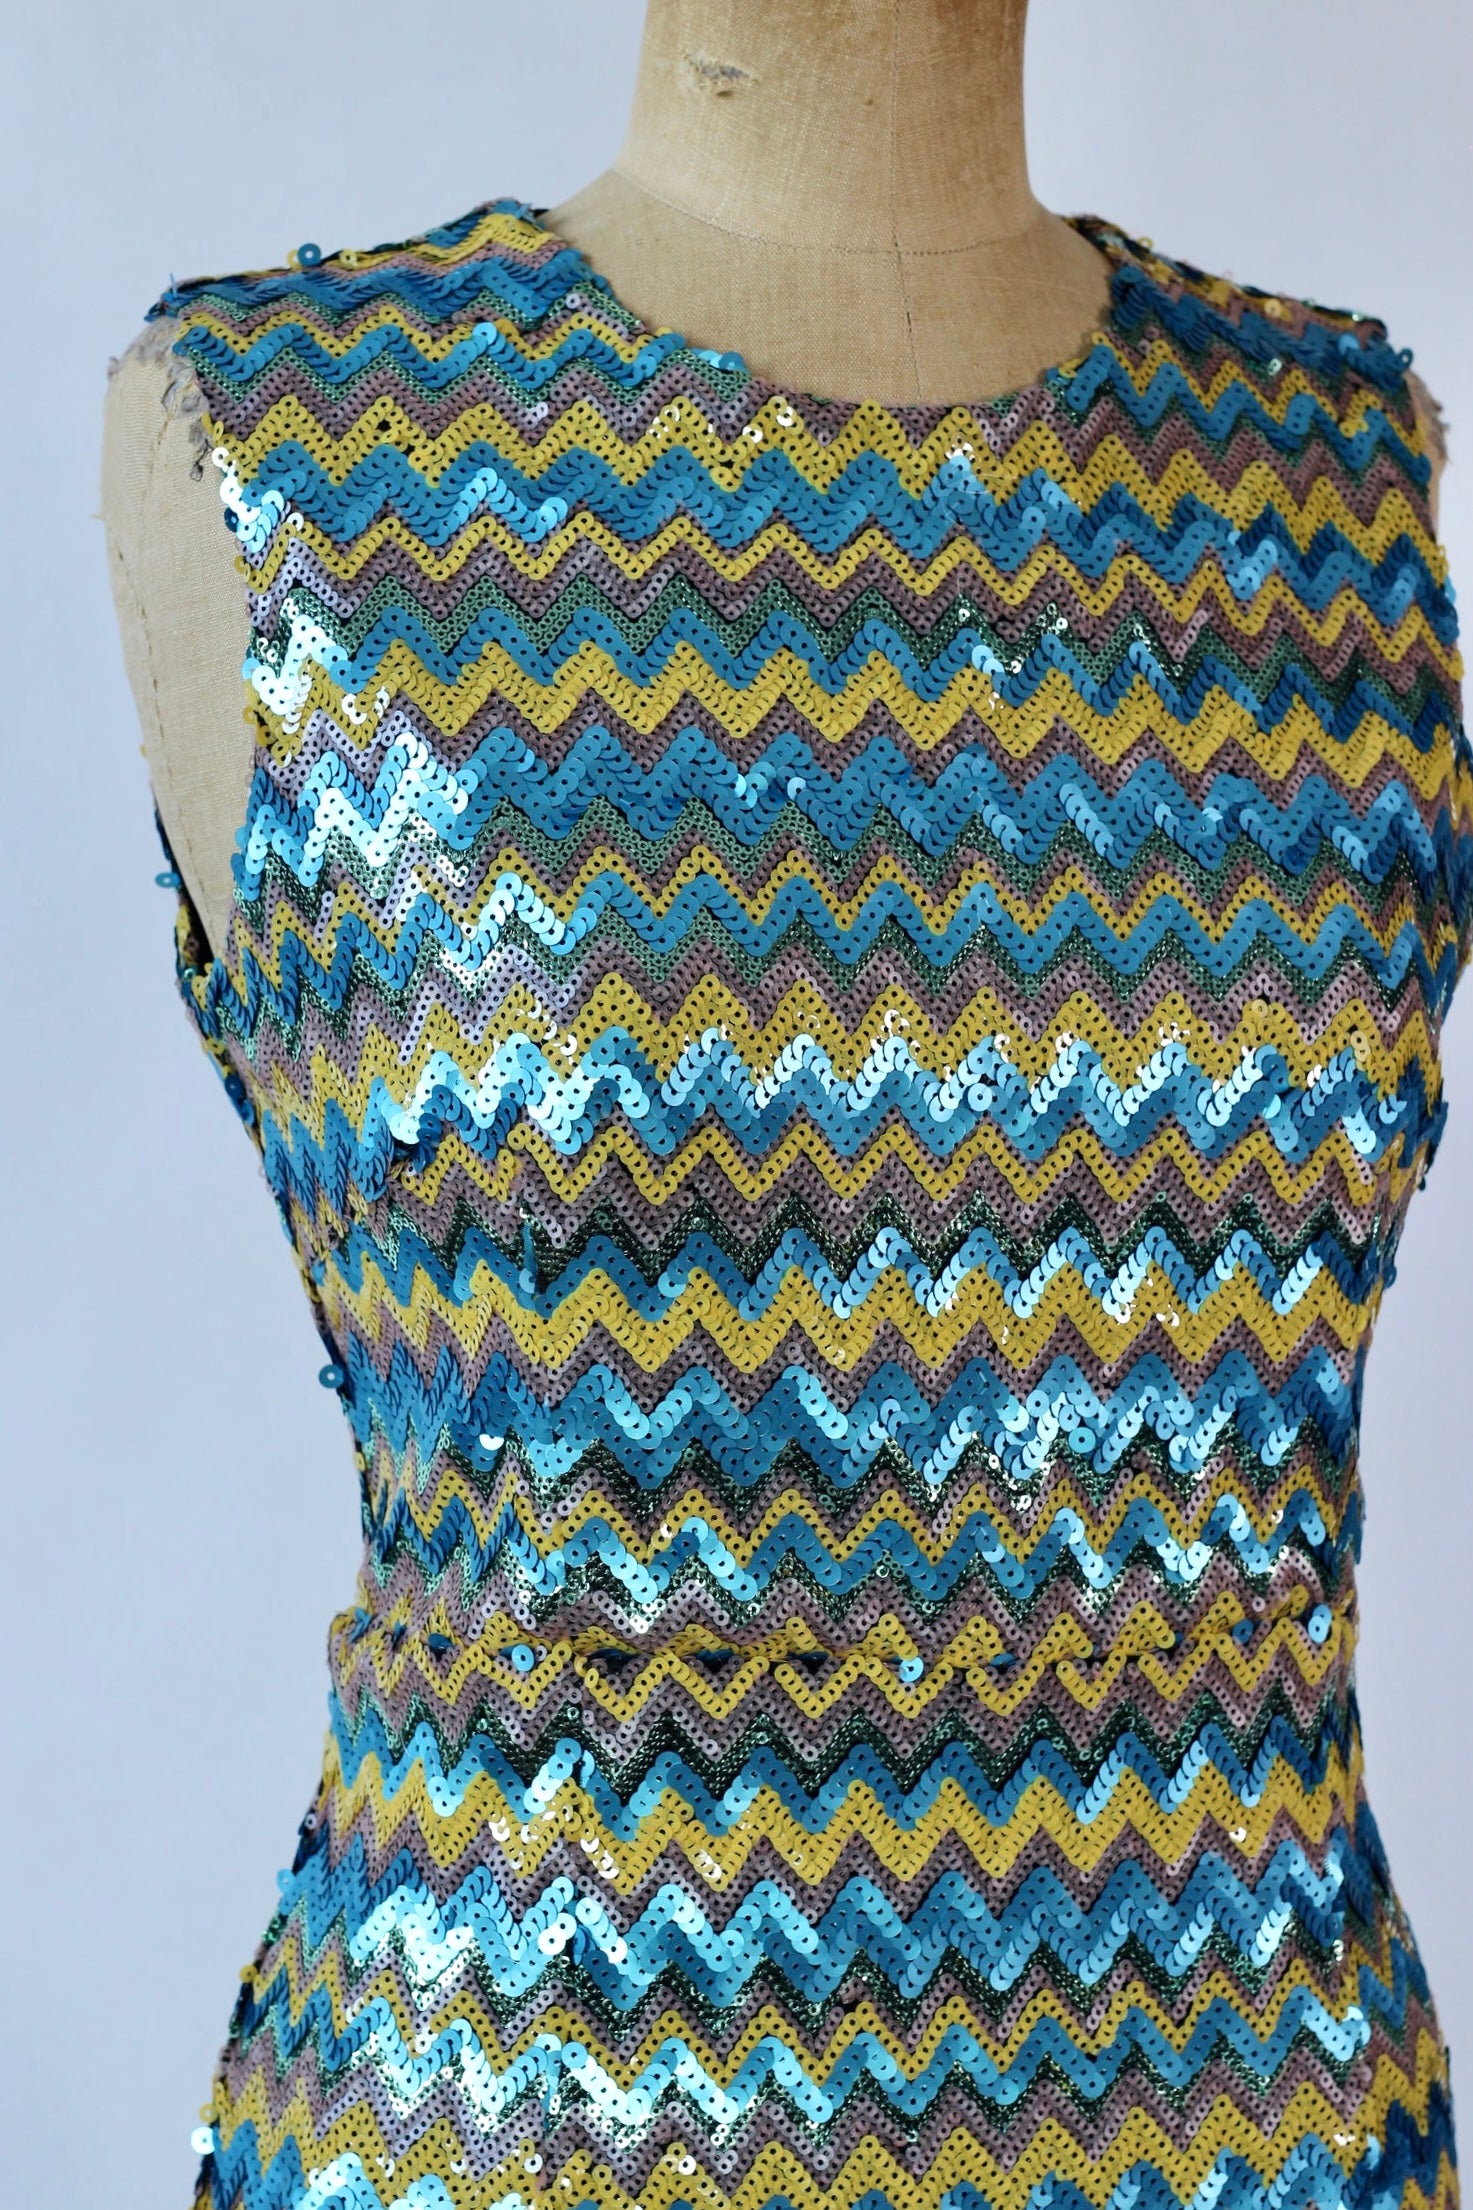 Sequin Dress with Zig Zag Pattern//Size M